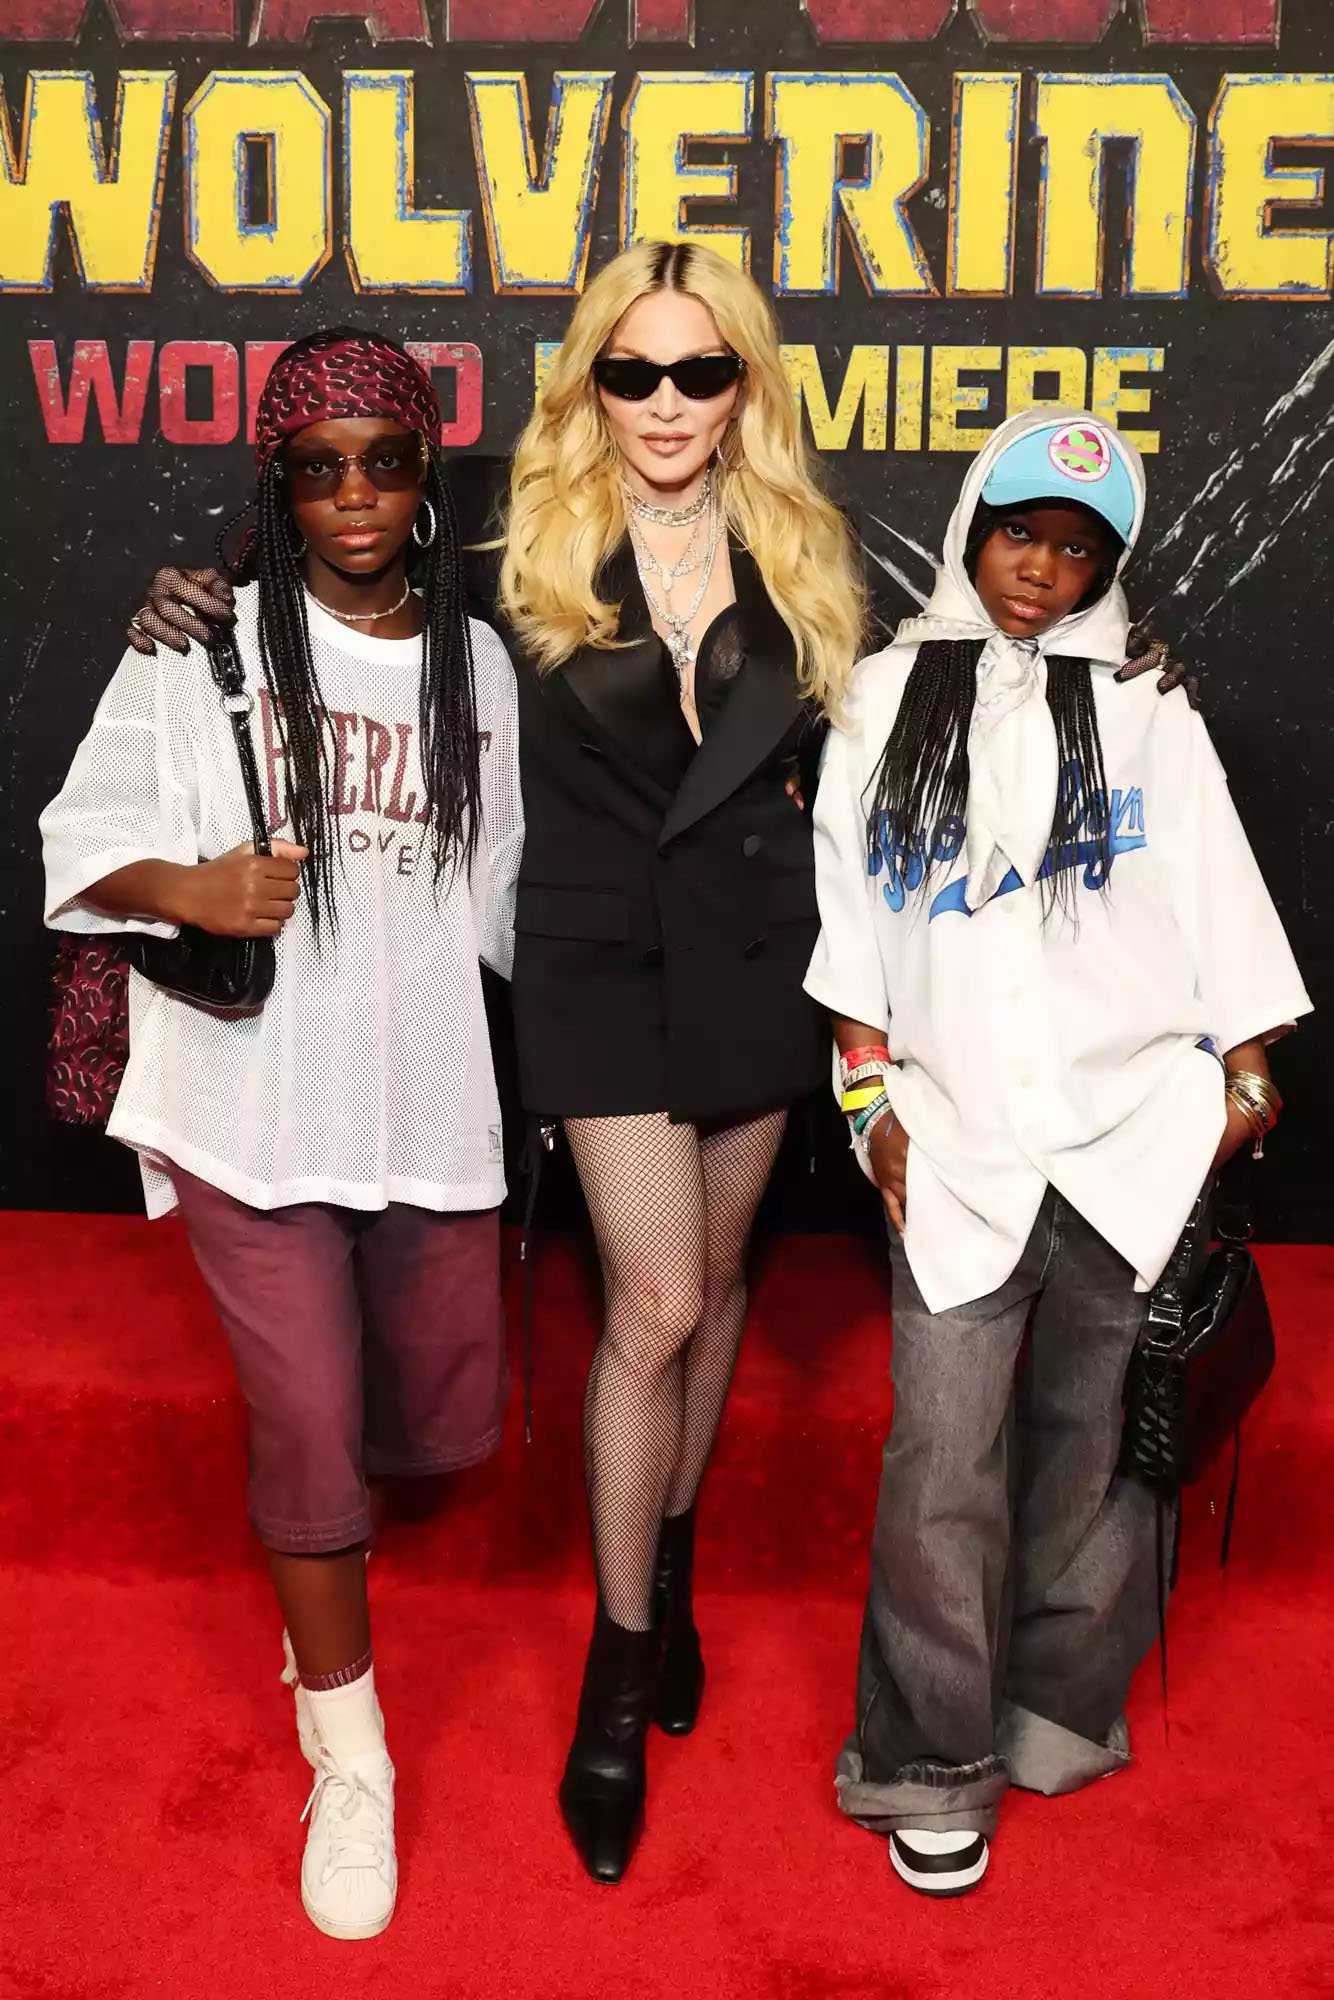 Madonna brings her bold style to life at Deadpool and Wolverine premiere